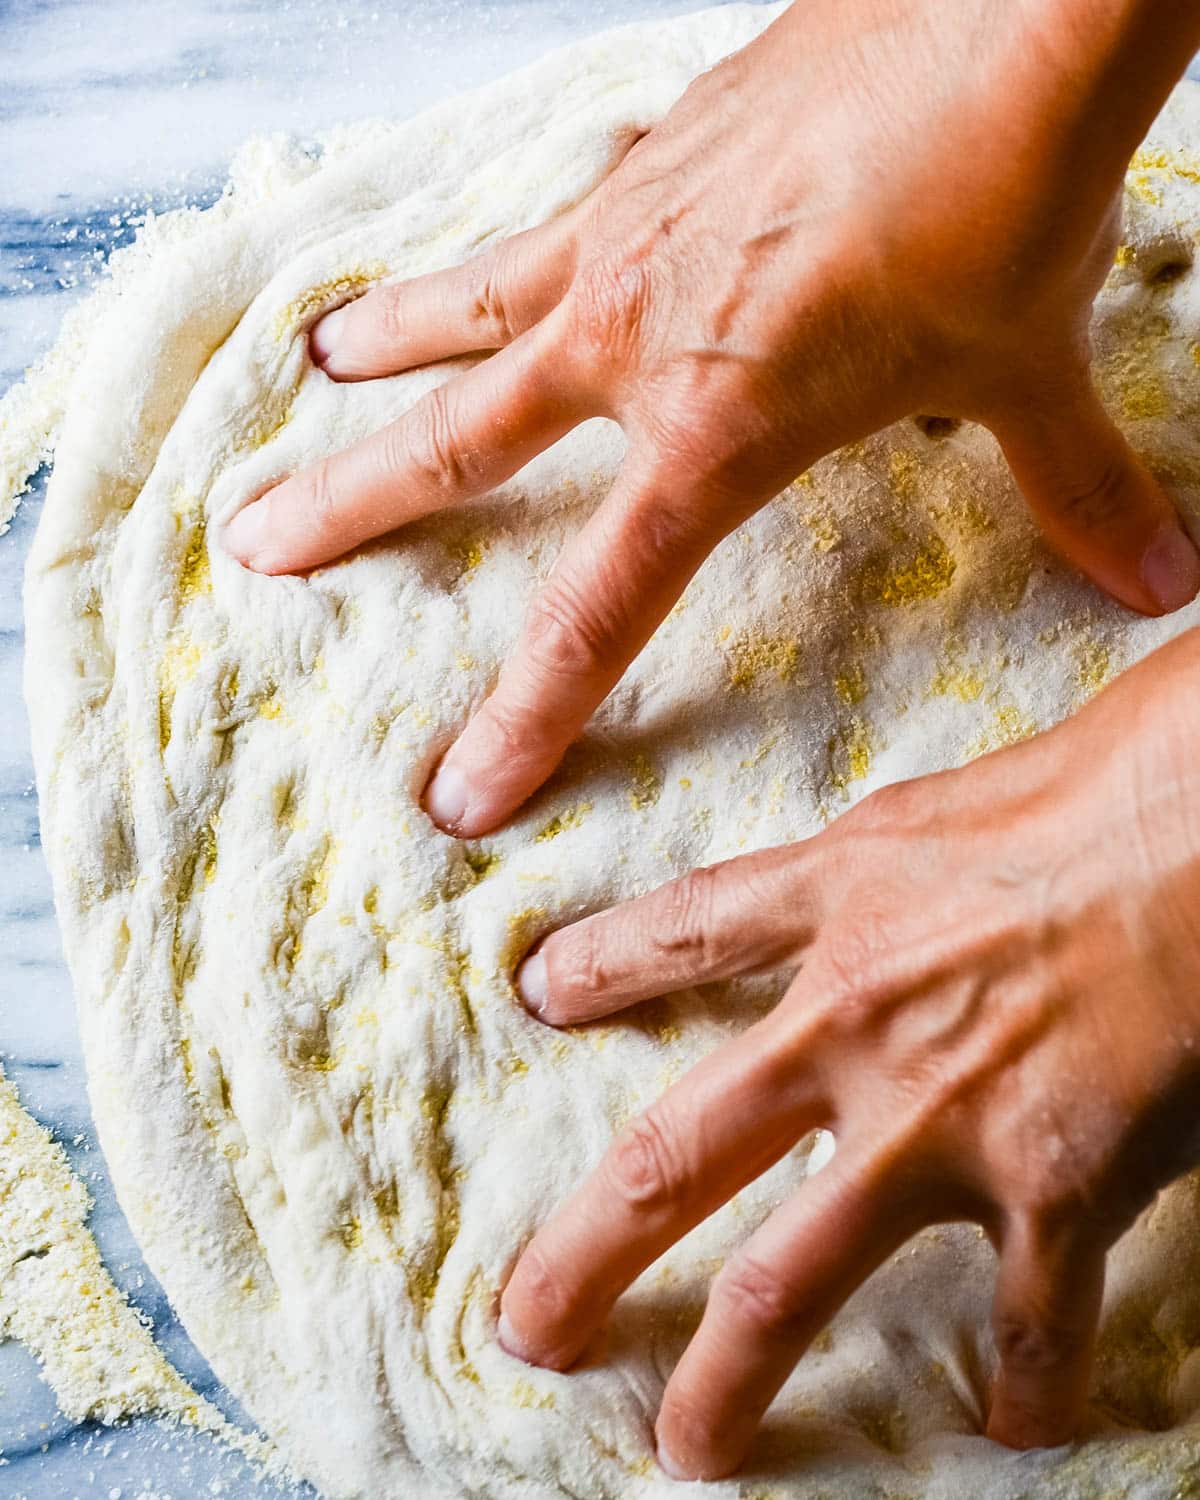 Spreading the dough between my fingers.